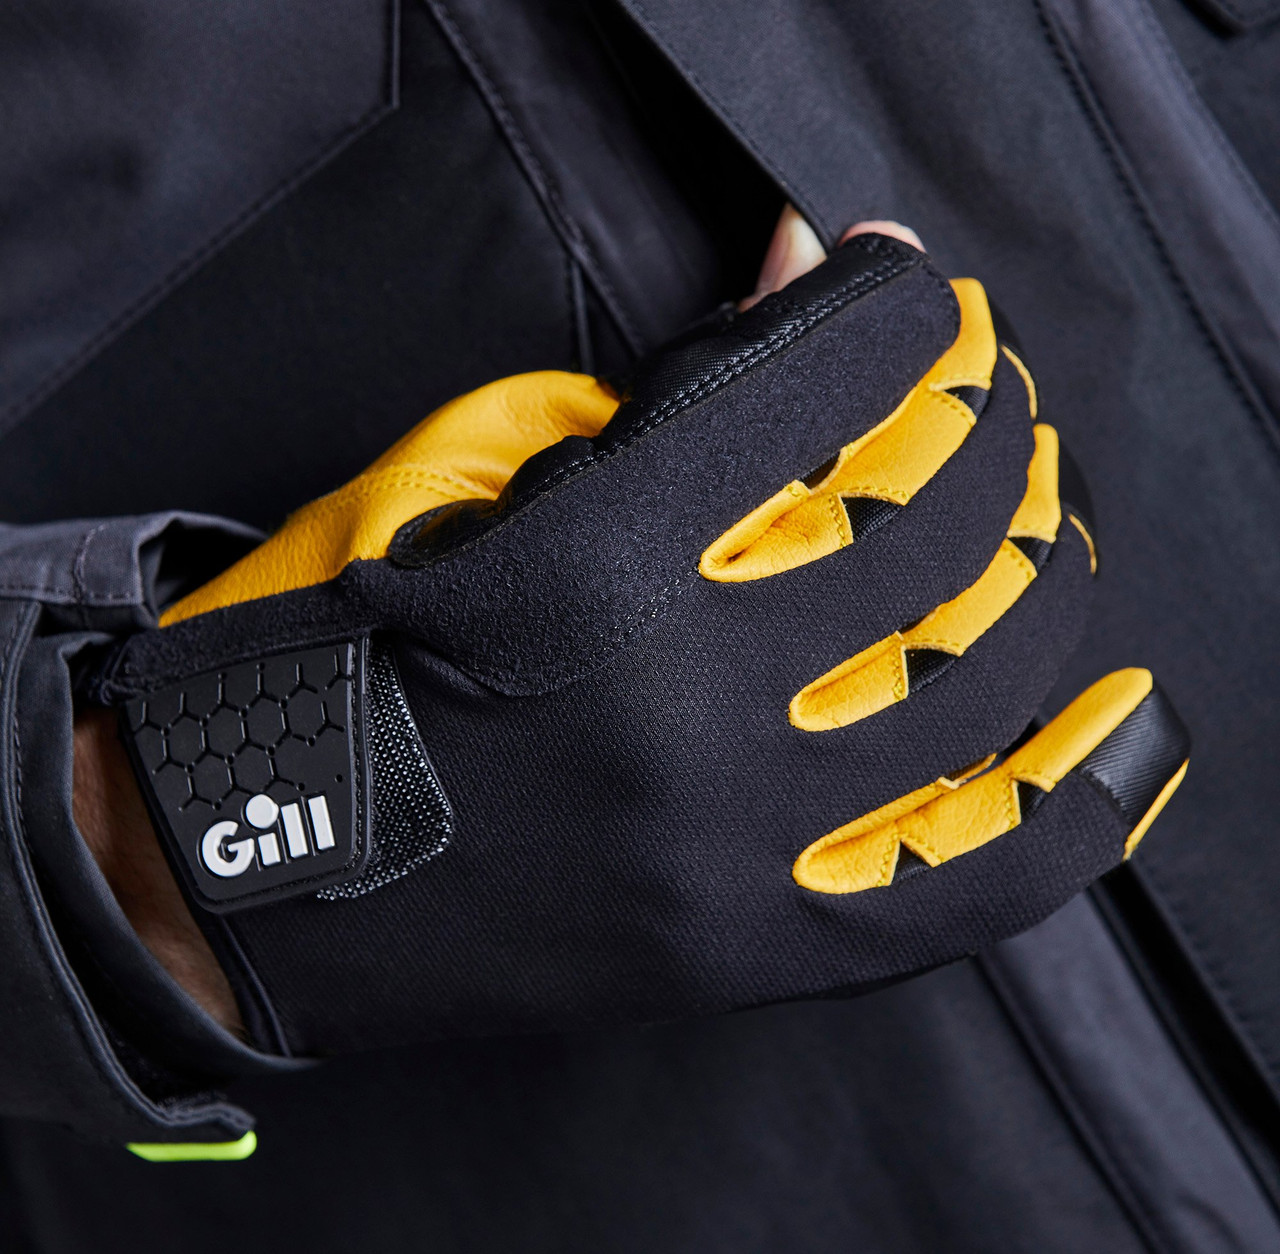  Gill Pro Sailing Gloves - Short Finger with 3/4 Length Fingers  for Sailing, Paddle & Board Sports, Kayaking or Windsurfing : Sports &  Outdoors